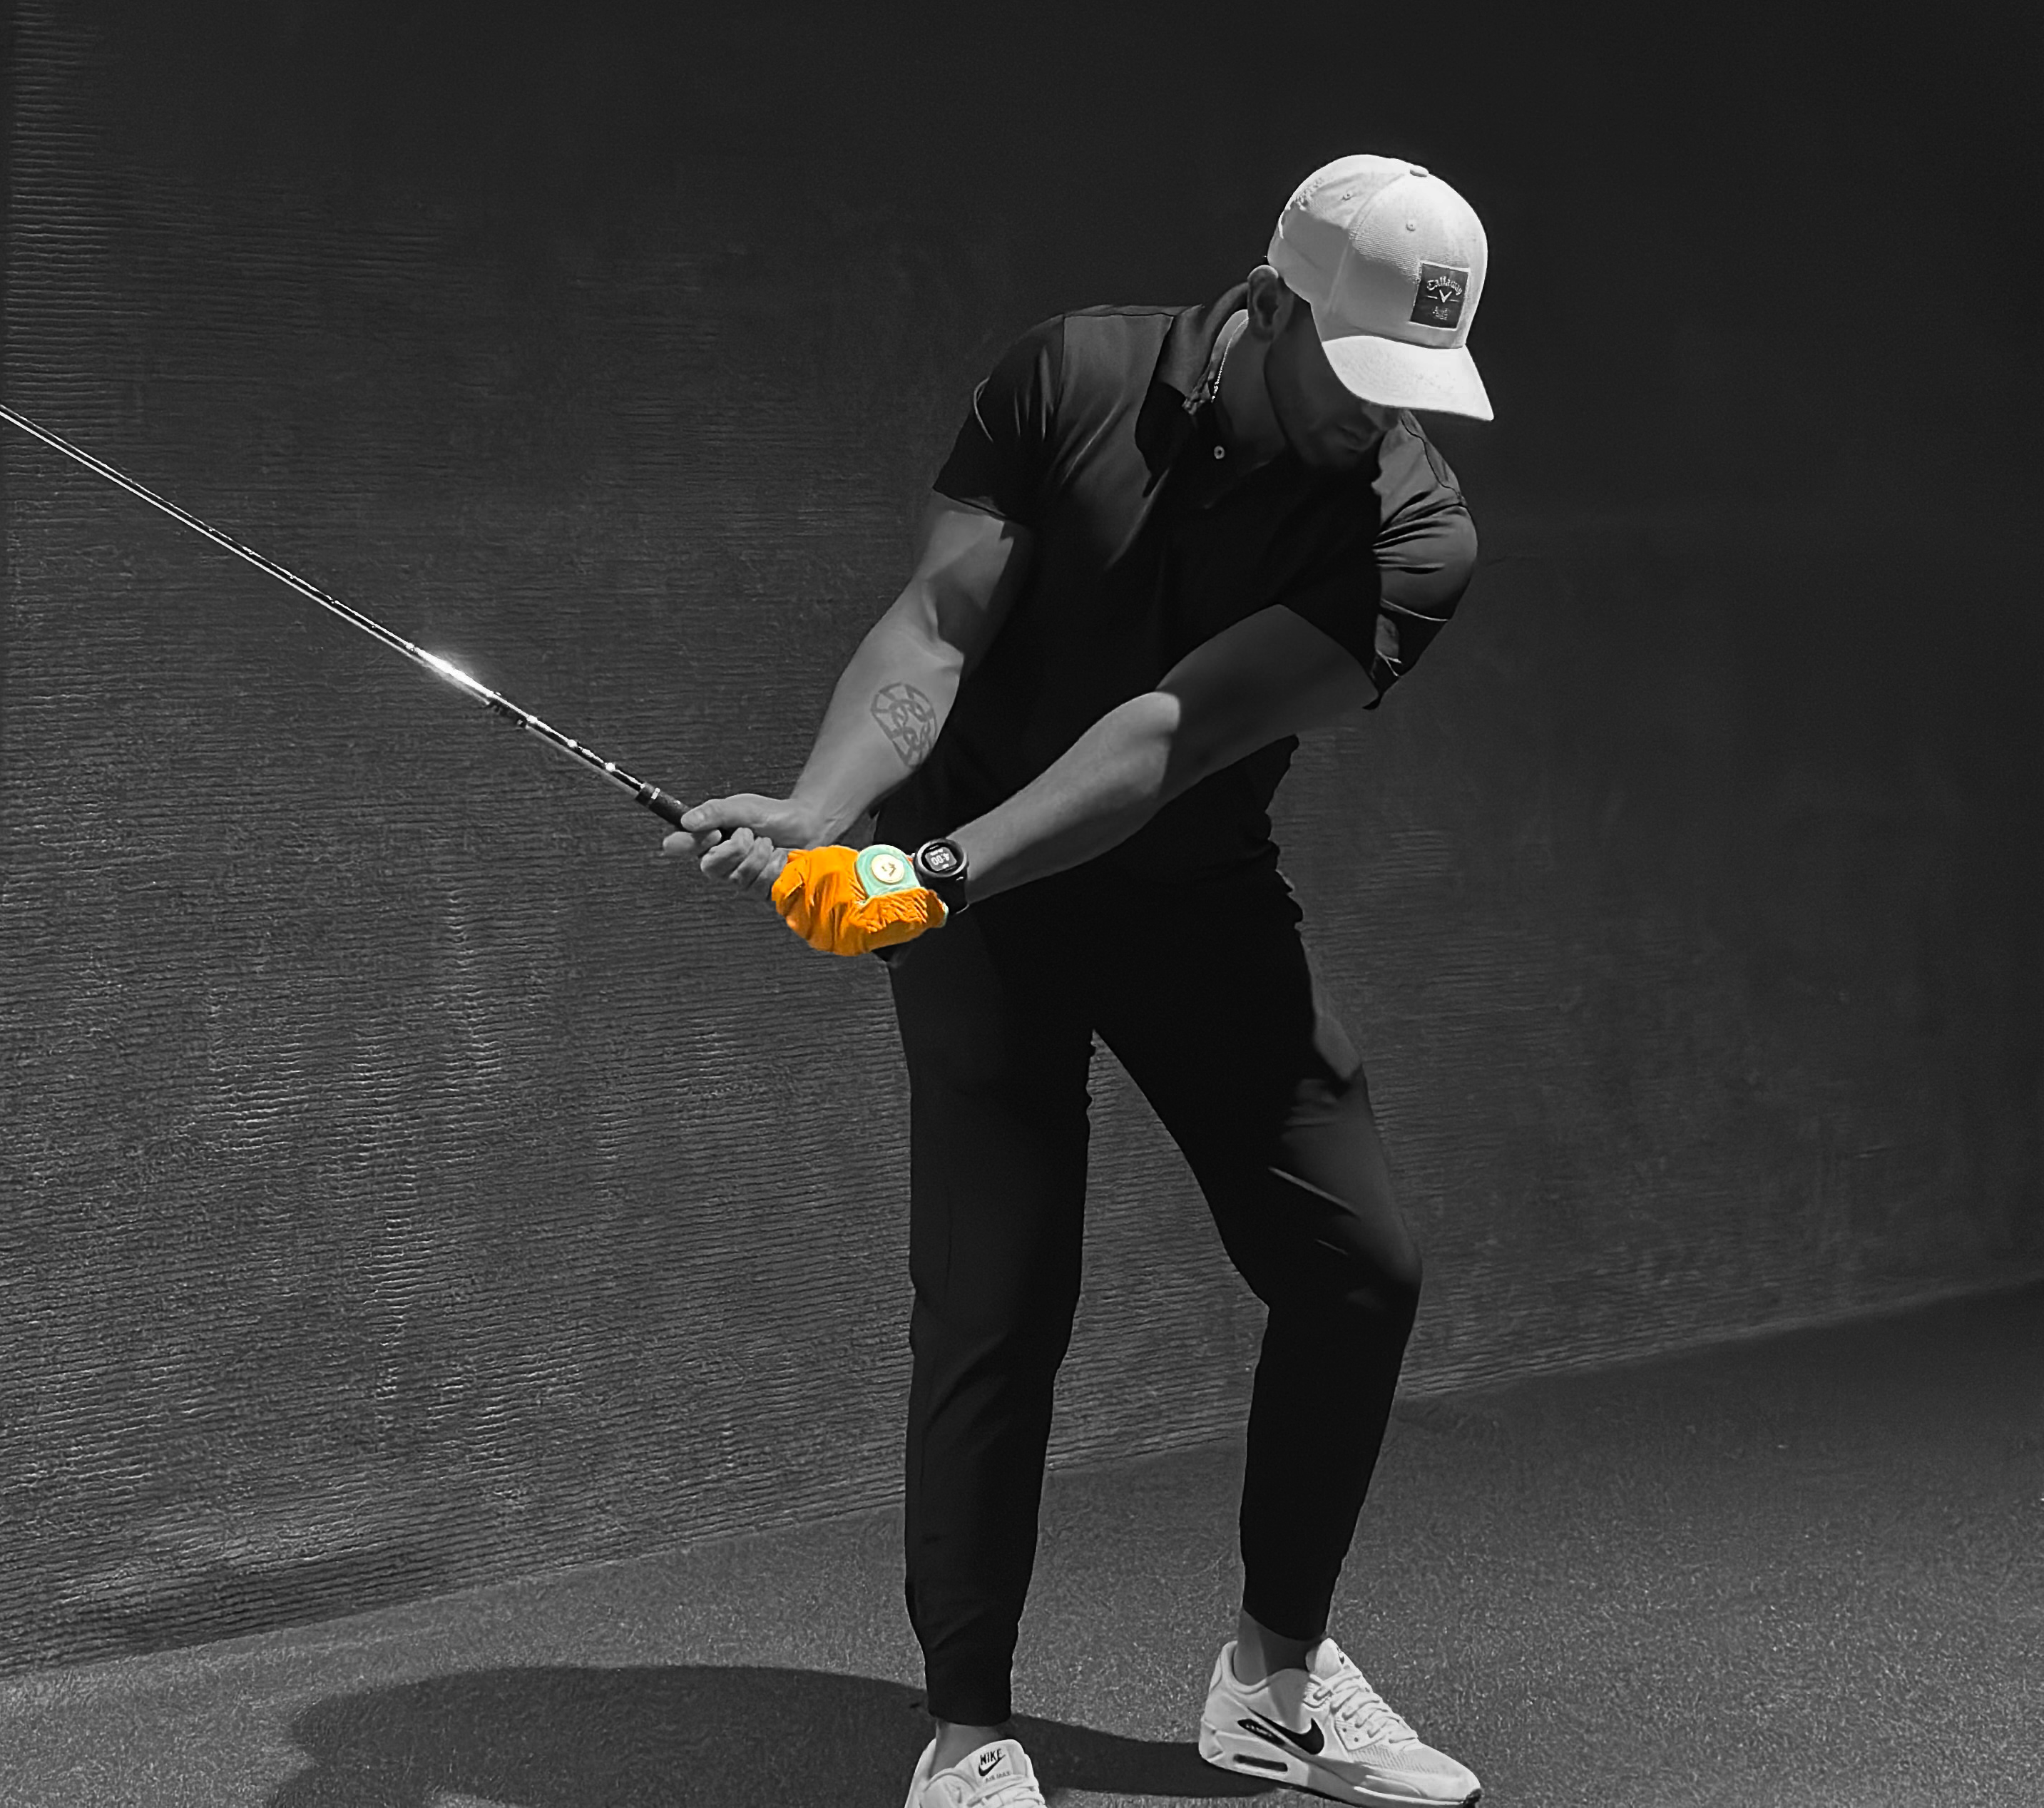 Founder of VivanTee golf gloves swinging golf club in simulator with an orange golf glove and black and white background. 